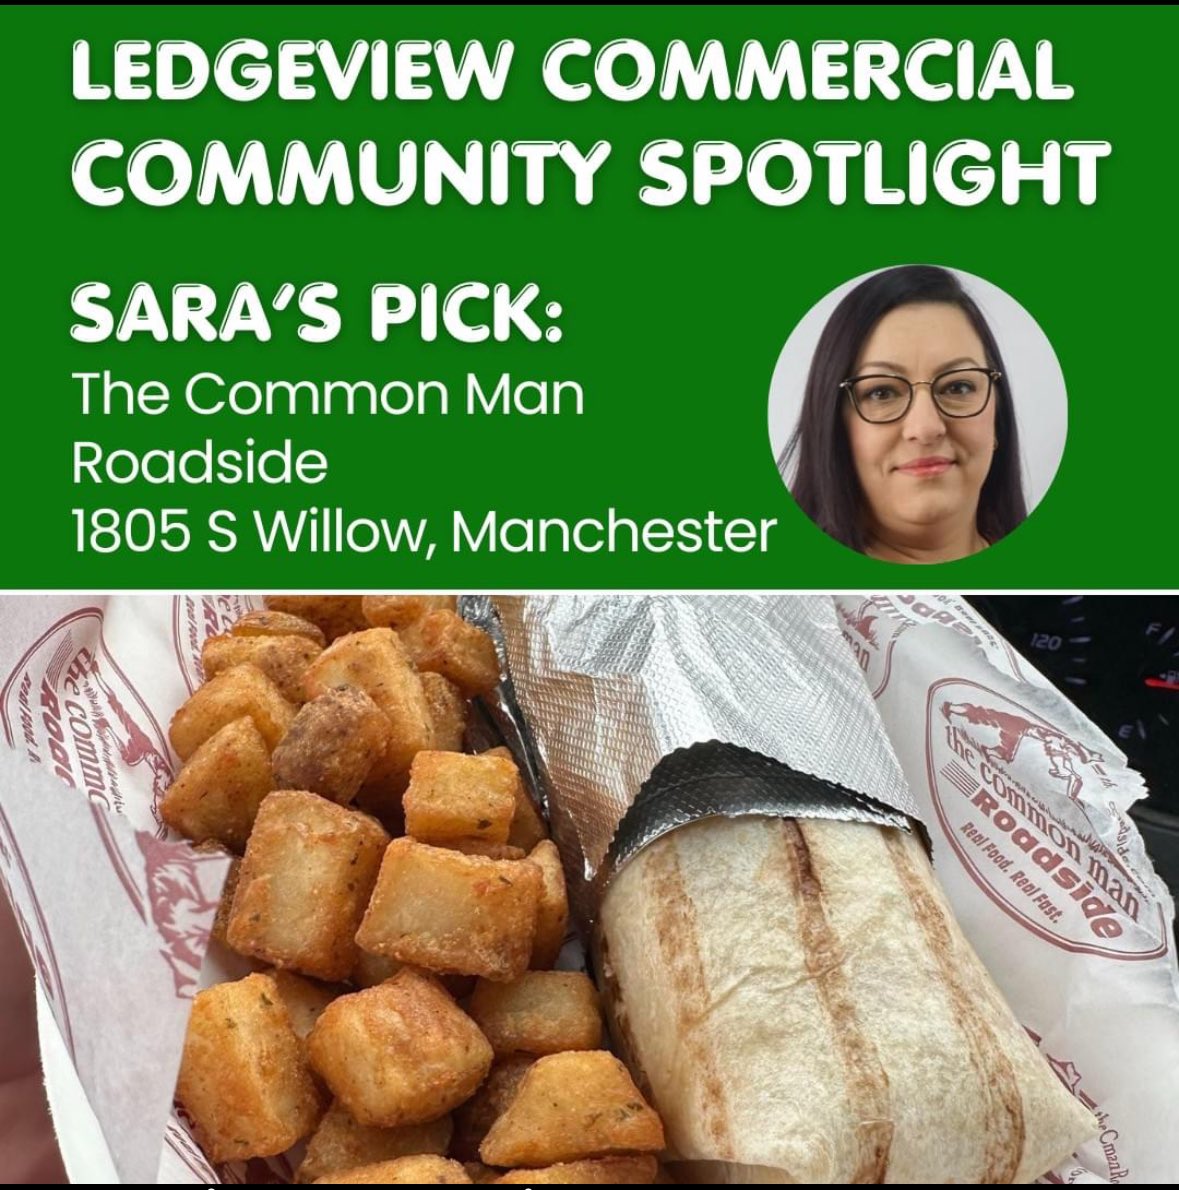 “Sara wants to give a shout-out to The Common Man Roadside Market & Deli - Manchester, NH for this tasty breakfast.” @luvMHT @ManchInkLink #nh @WMUR9 @manch_econ_dev #mht